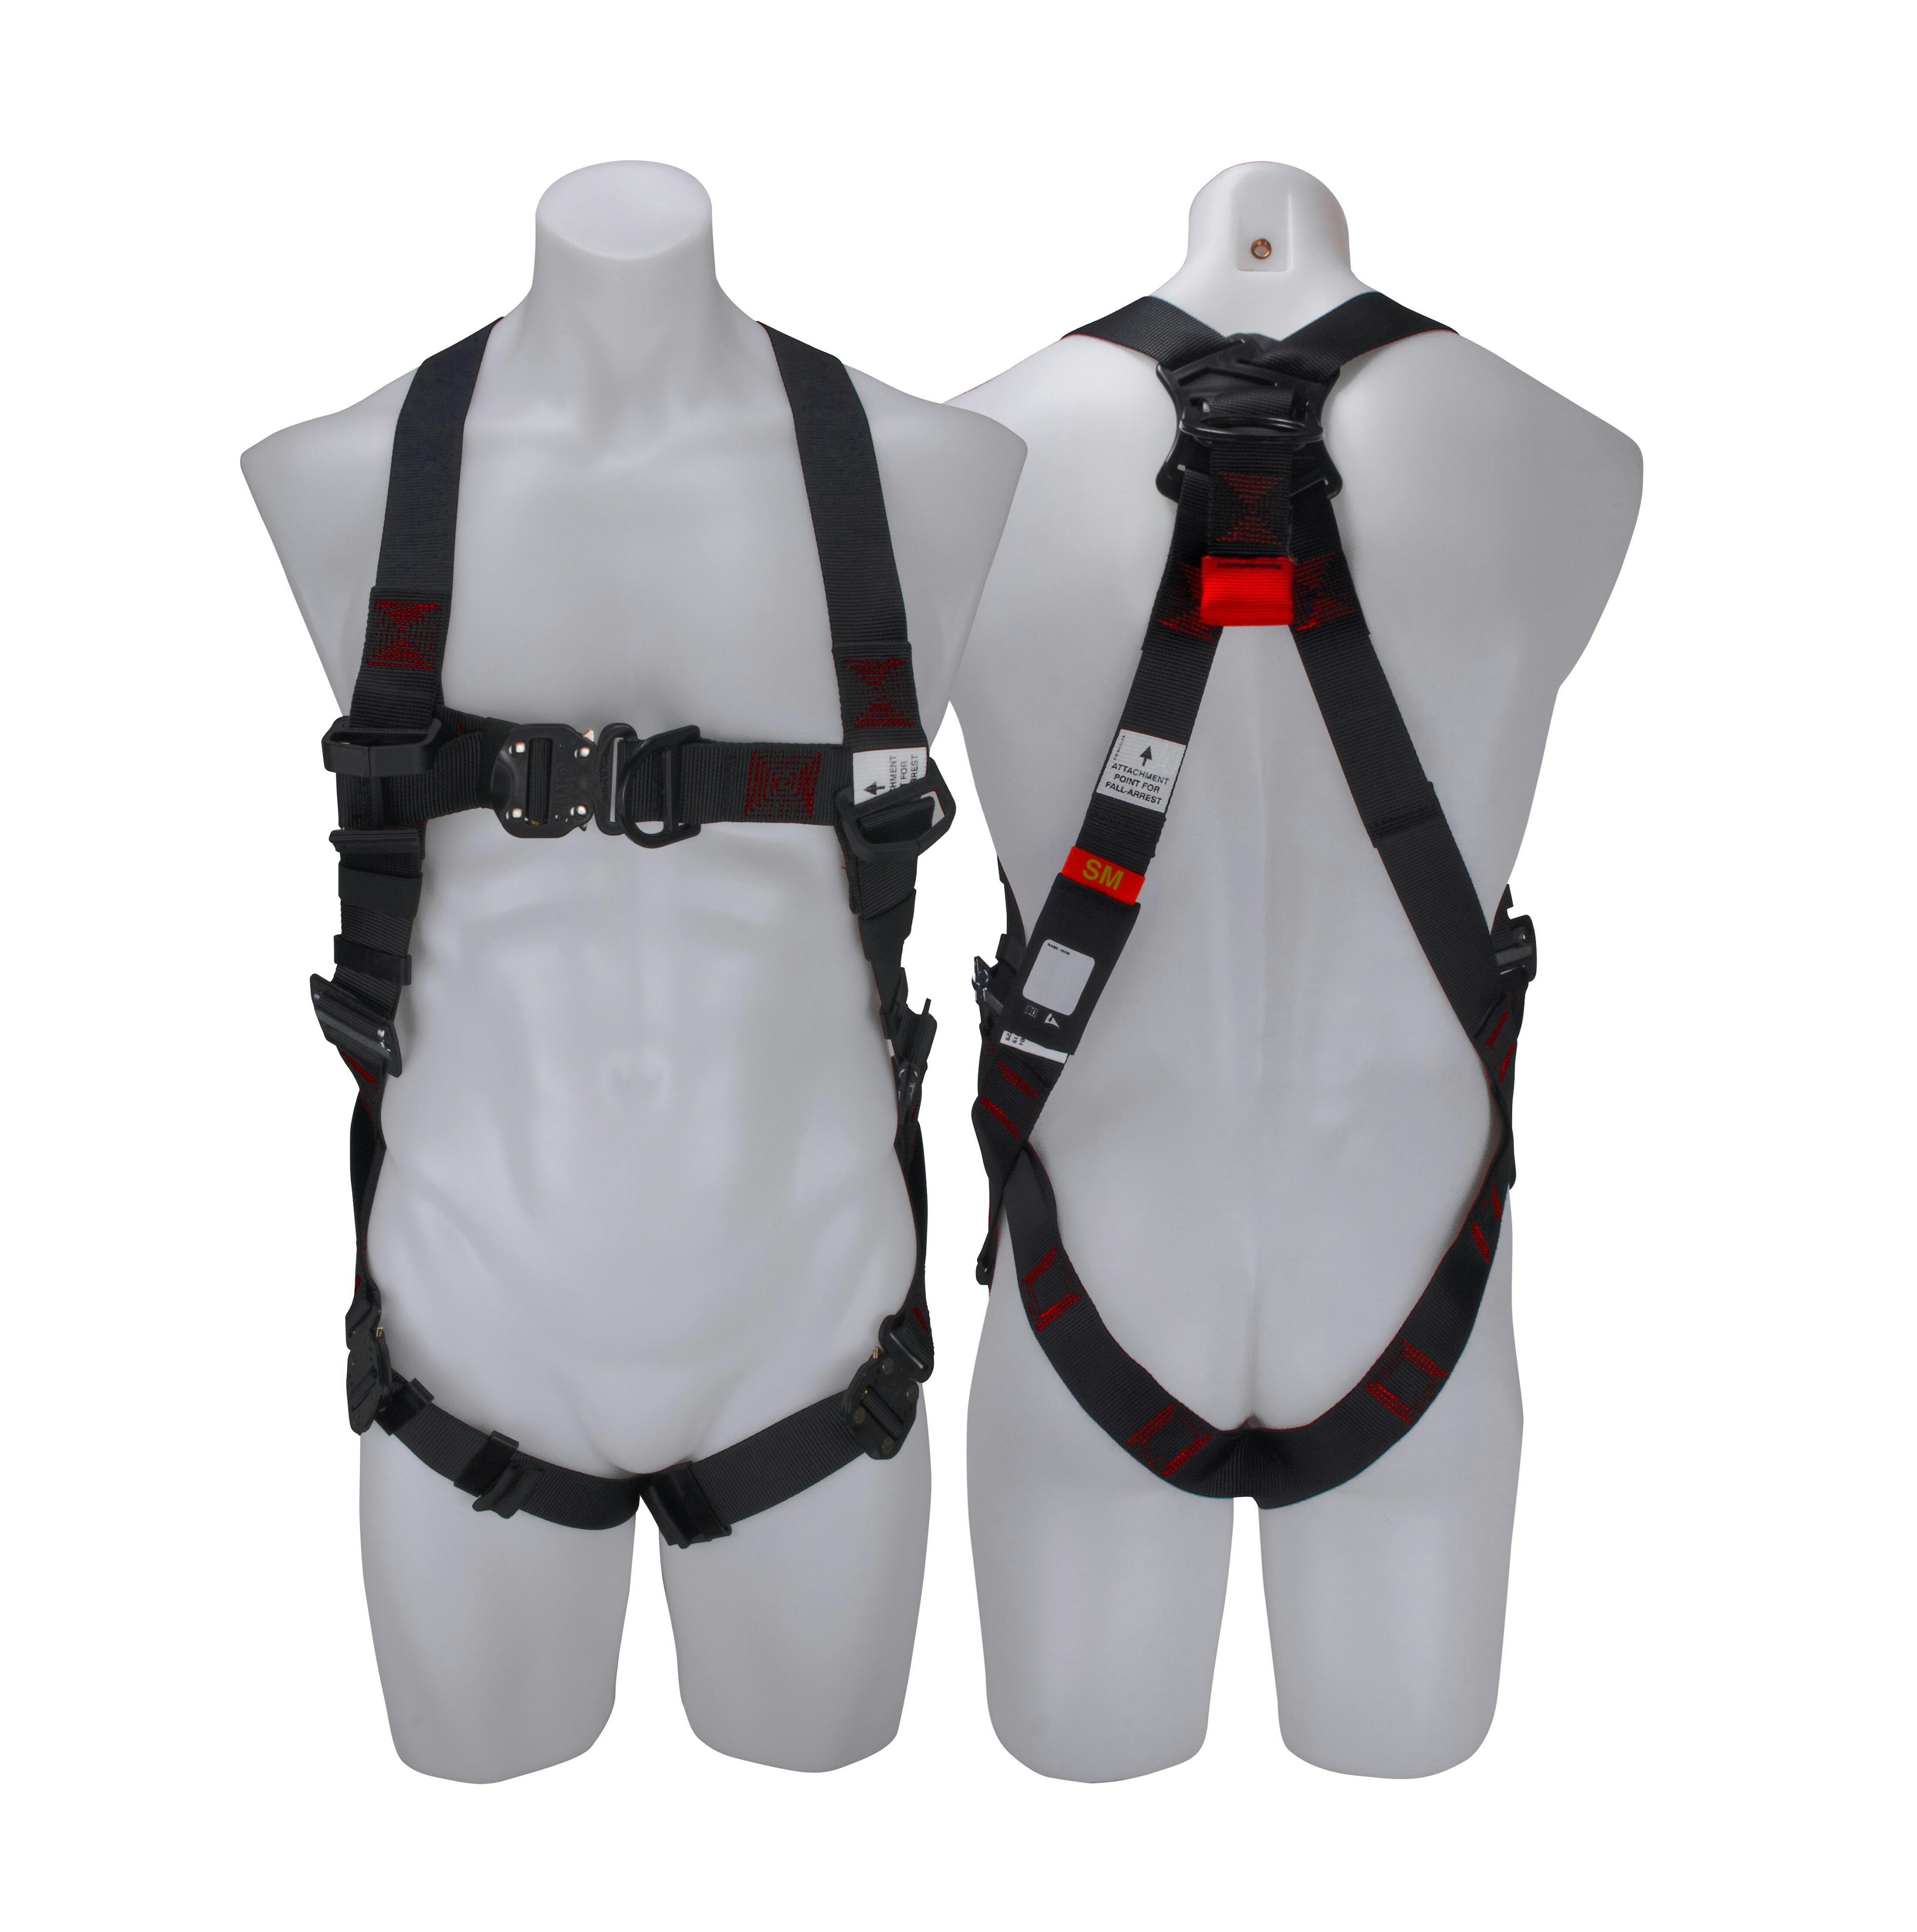 3M™ PROTECTA® X Riggers Harness 1161672, Red and Black, Small, 1 EA/Case